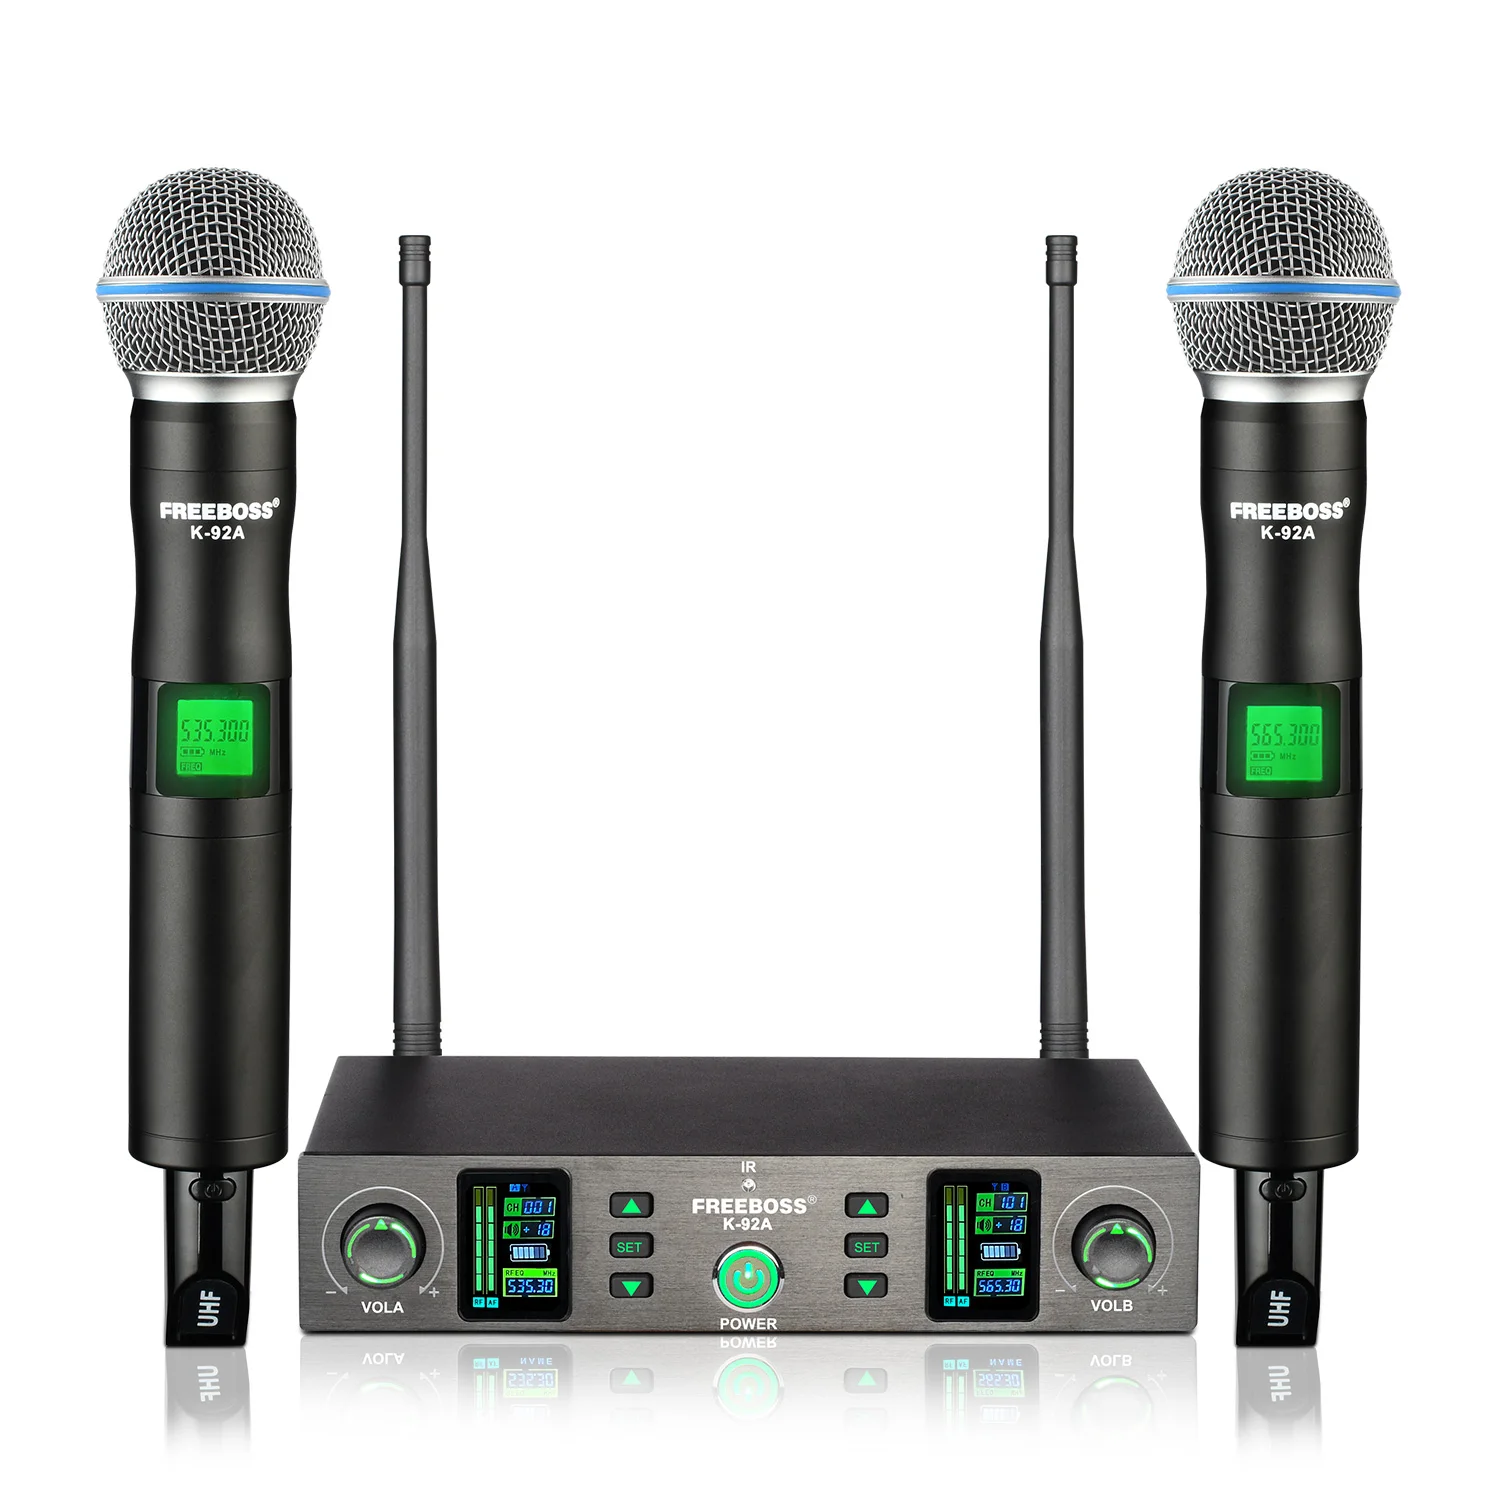 

FREEBOSS Adjustable Frequency Wireless Mic UHF Auto Scan 2 Handheld Transmitters IR Dynamic Stage KTV Cordless Microphone K-92A